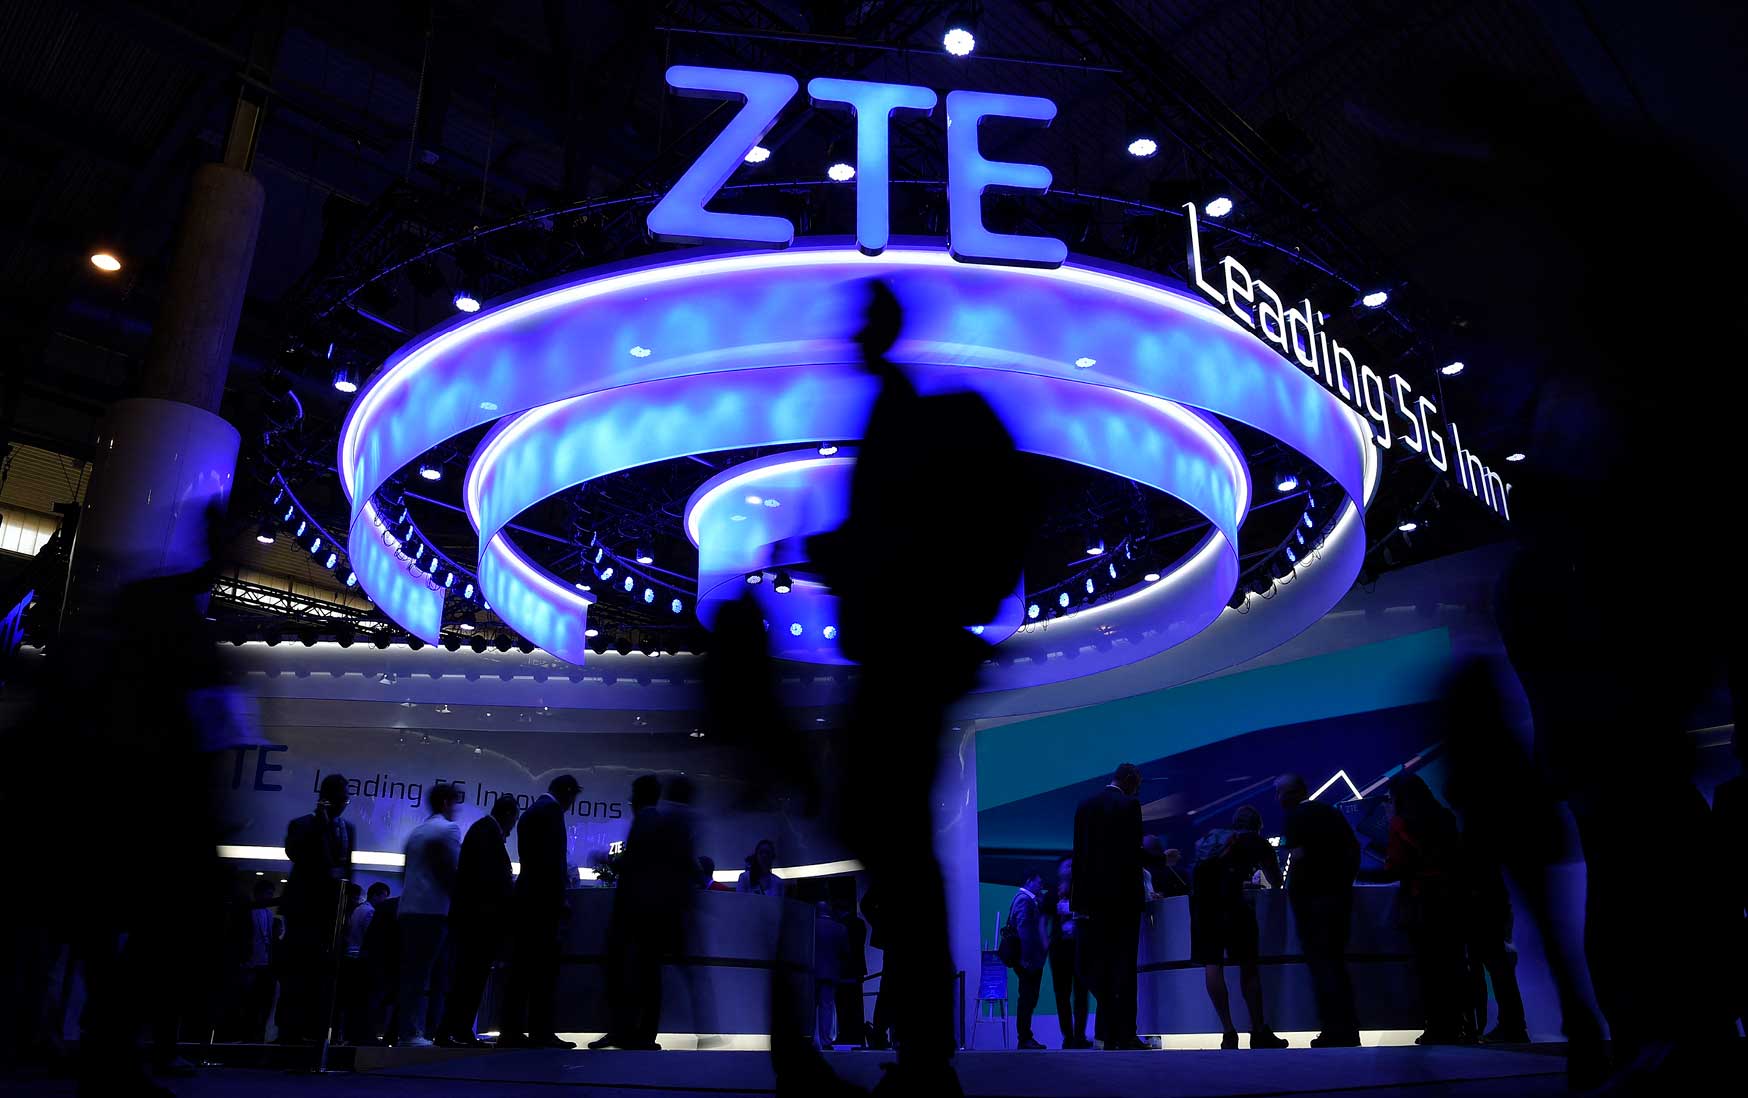 ZTE's stand at the Mobile World Congress